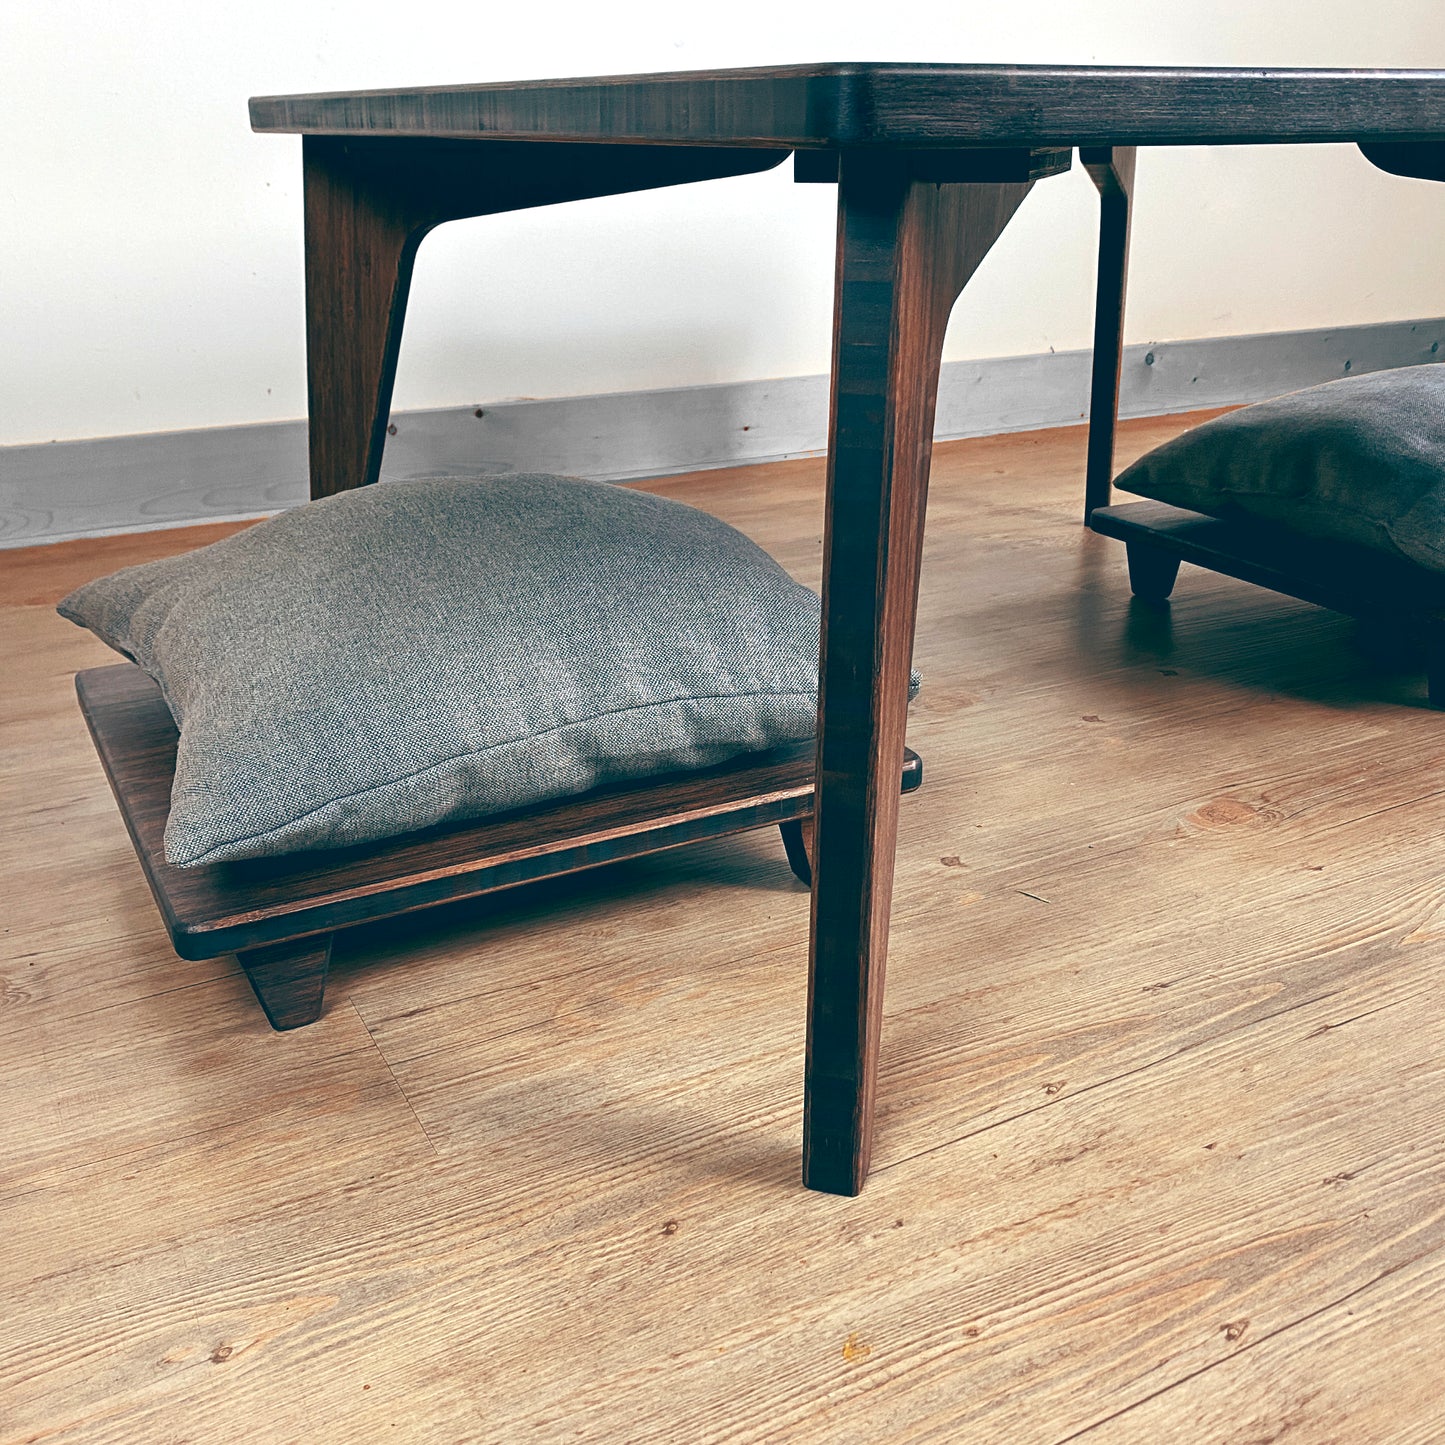 LOW Square Coffee Table Set: Ebony Bamboo - Large